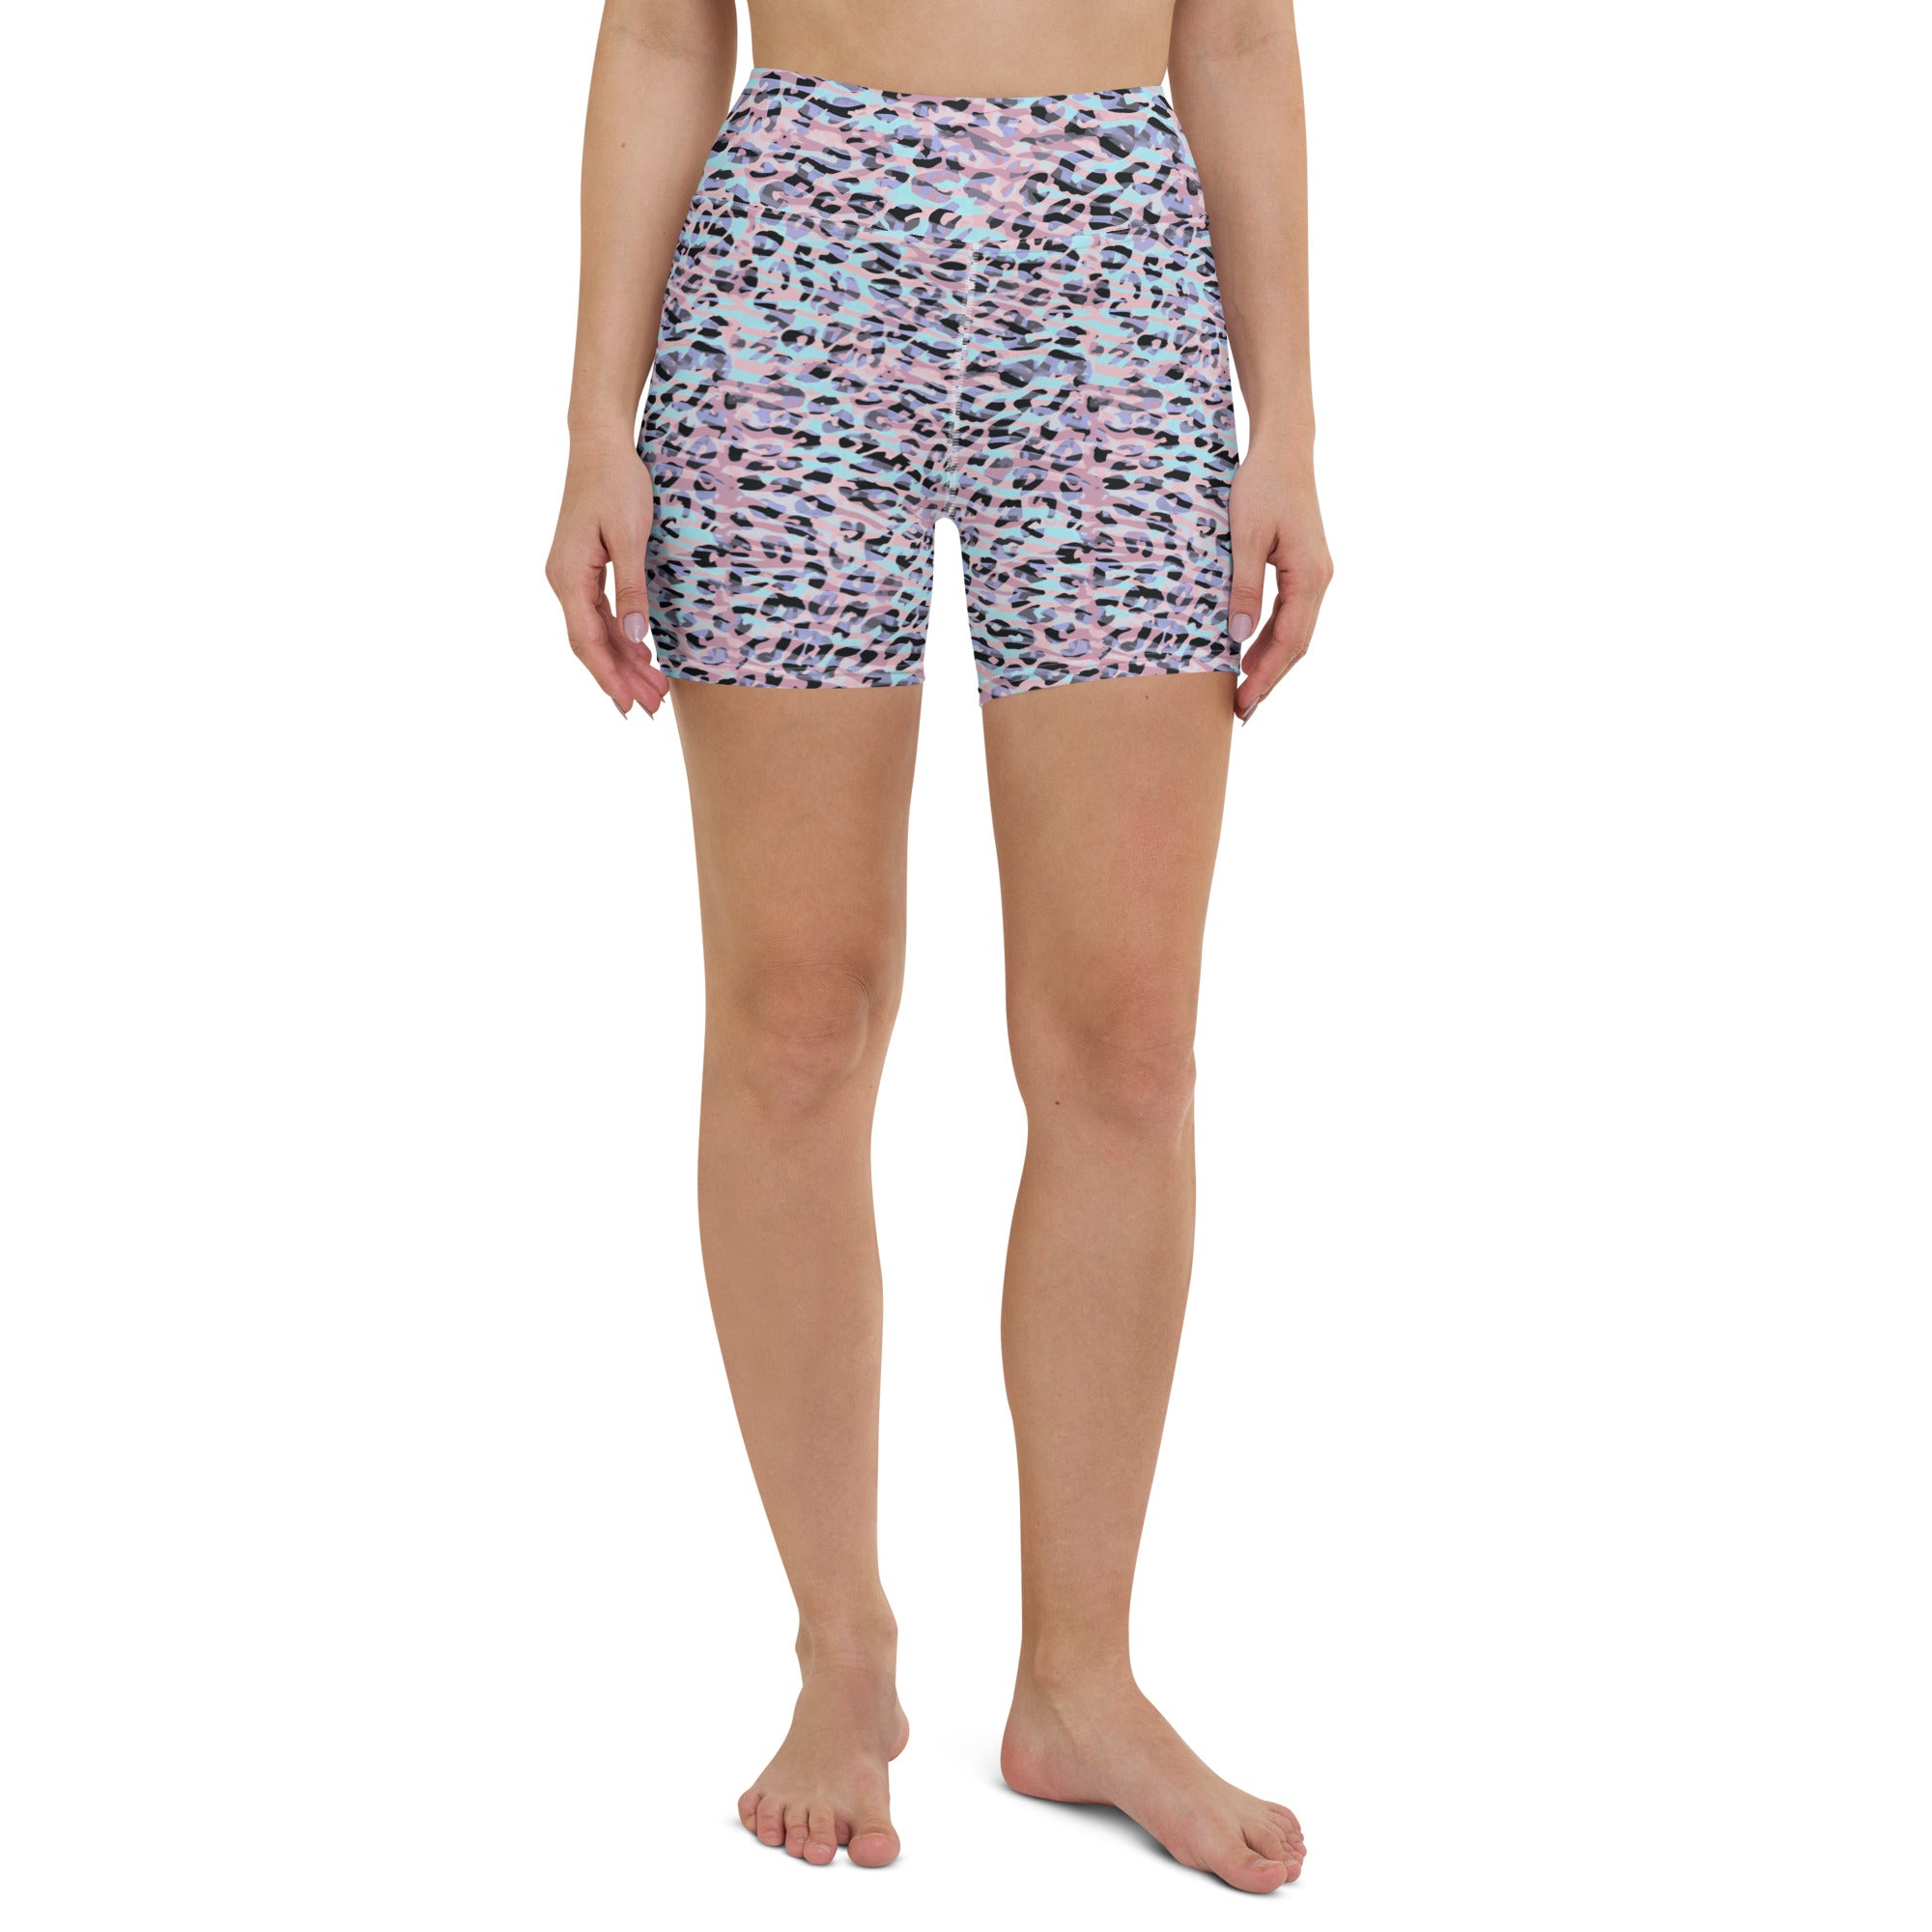 Yoga Shorts- ZEBRA AND LEOPARD PRINT PINK WITH CYAN